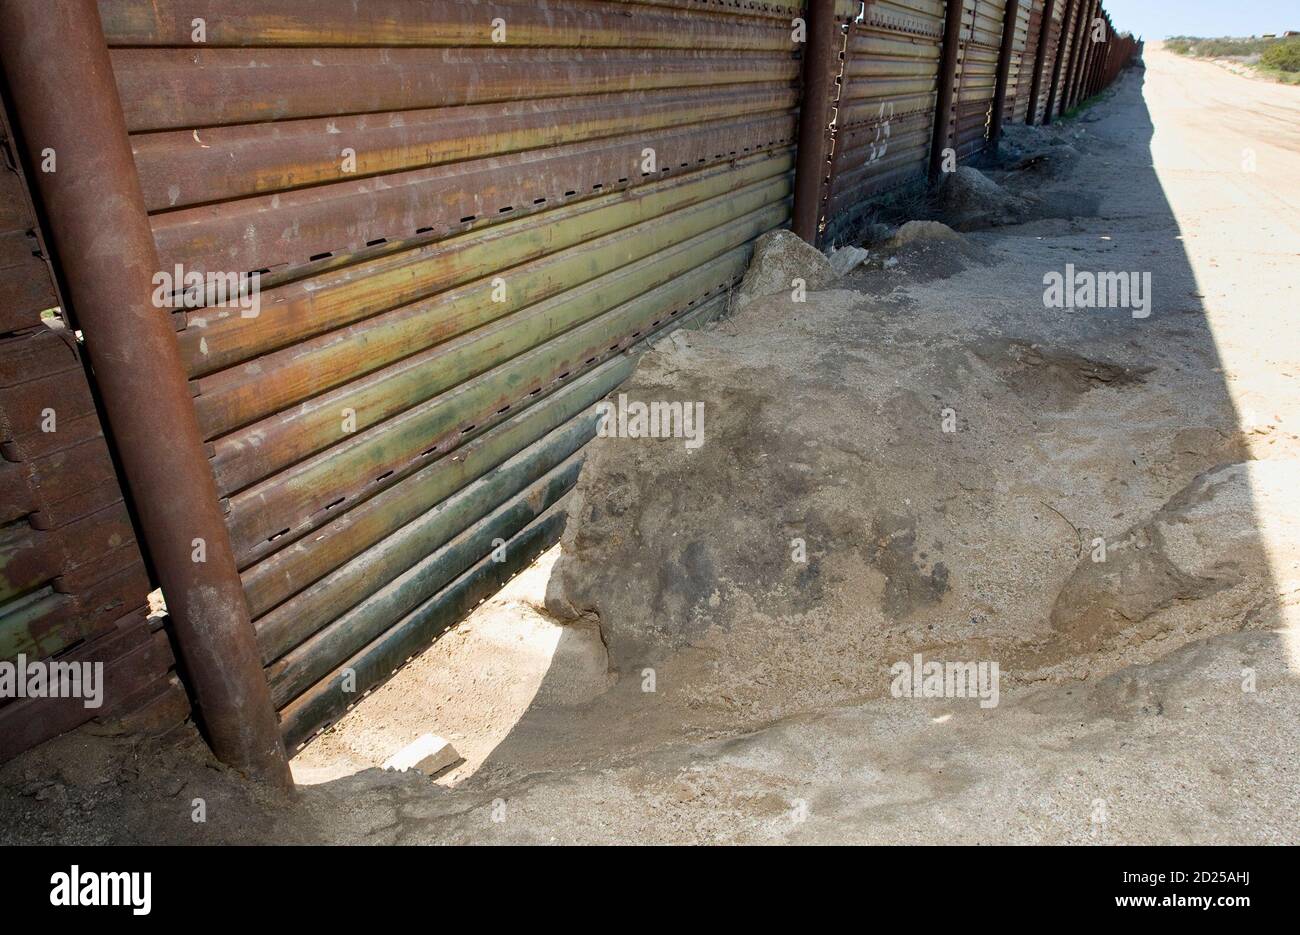 A man-sized hole dug under the border fence that separates the US and Mexico  along the border sits un-repaired near Campo, California in this photo  taken March 17, 2008. As U.S. authorities